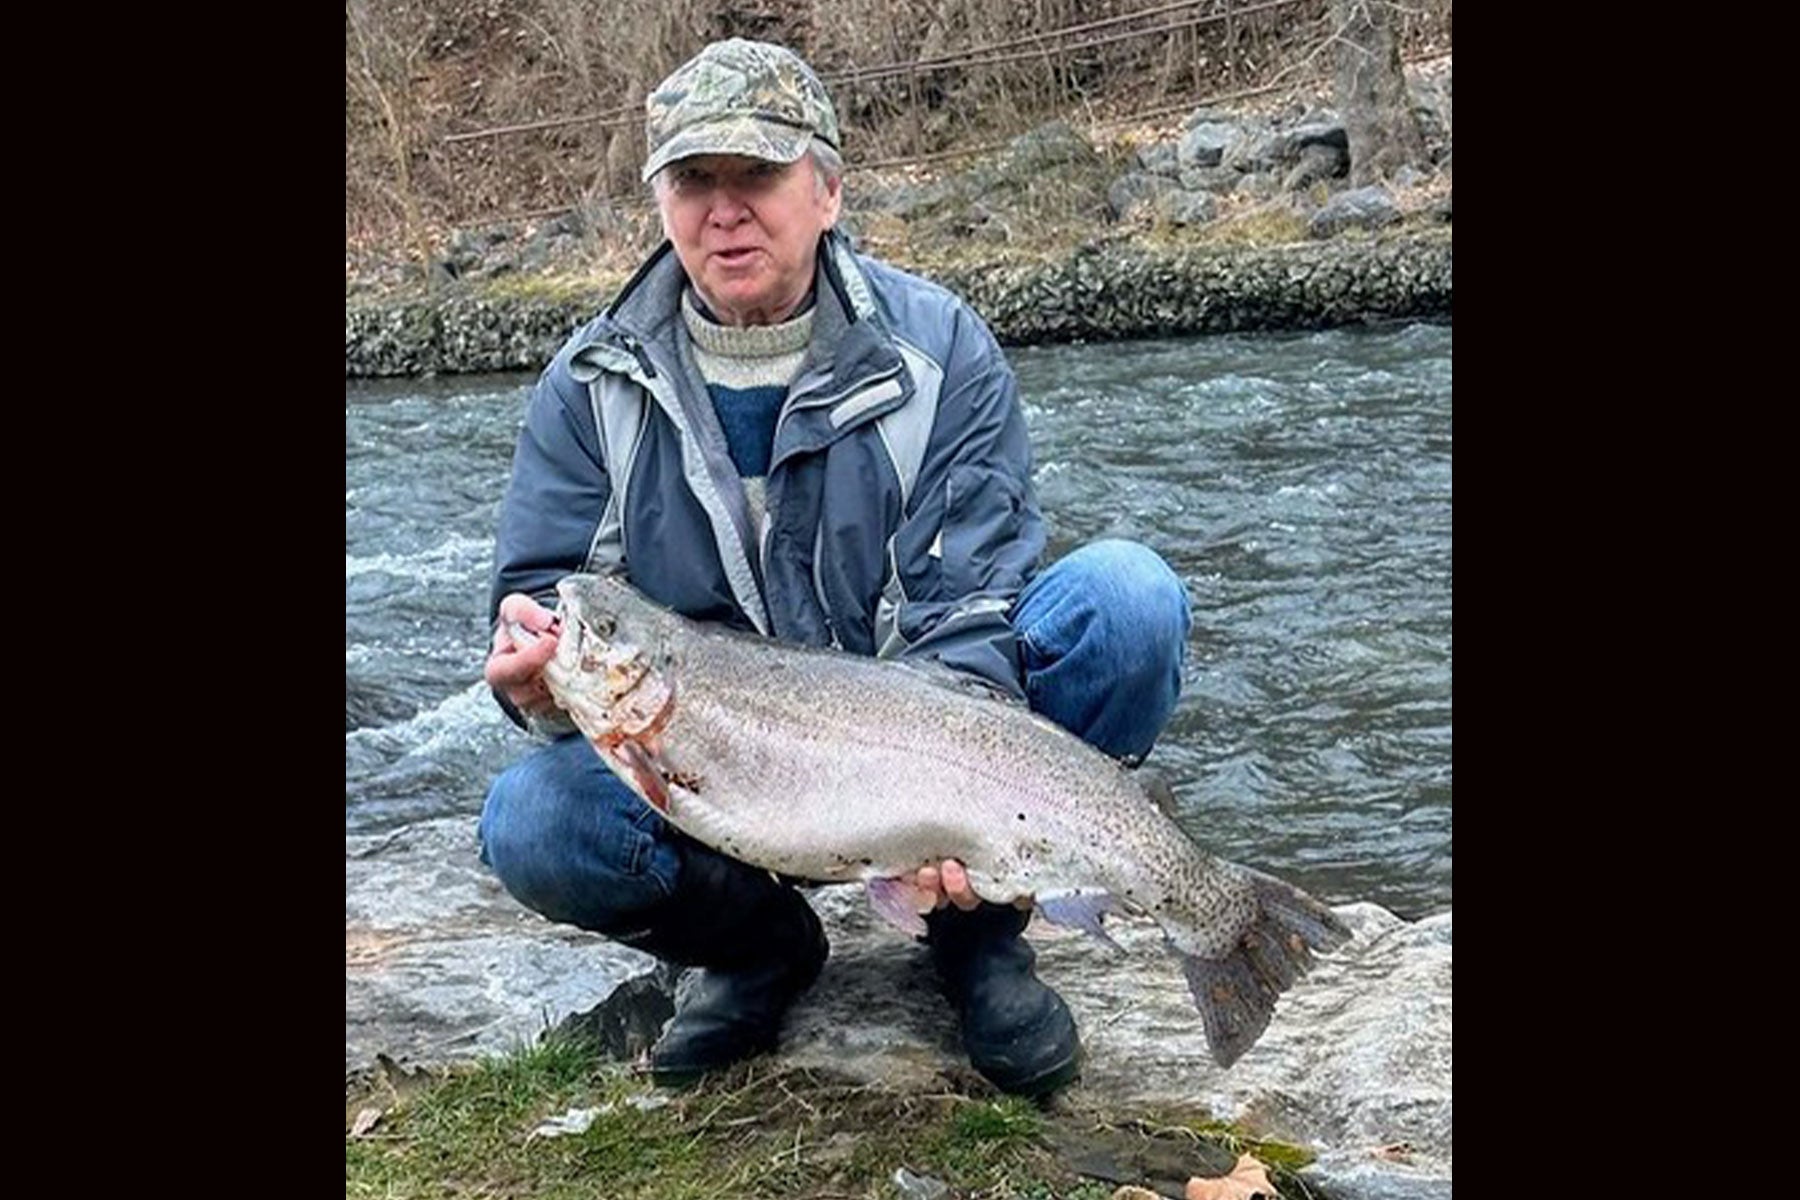 Maryland Angler Catches Whopper State Record Rainbow Trout